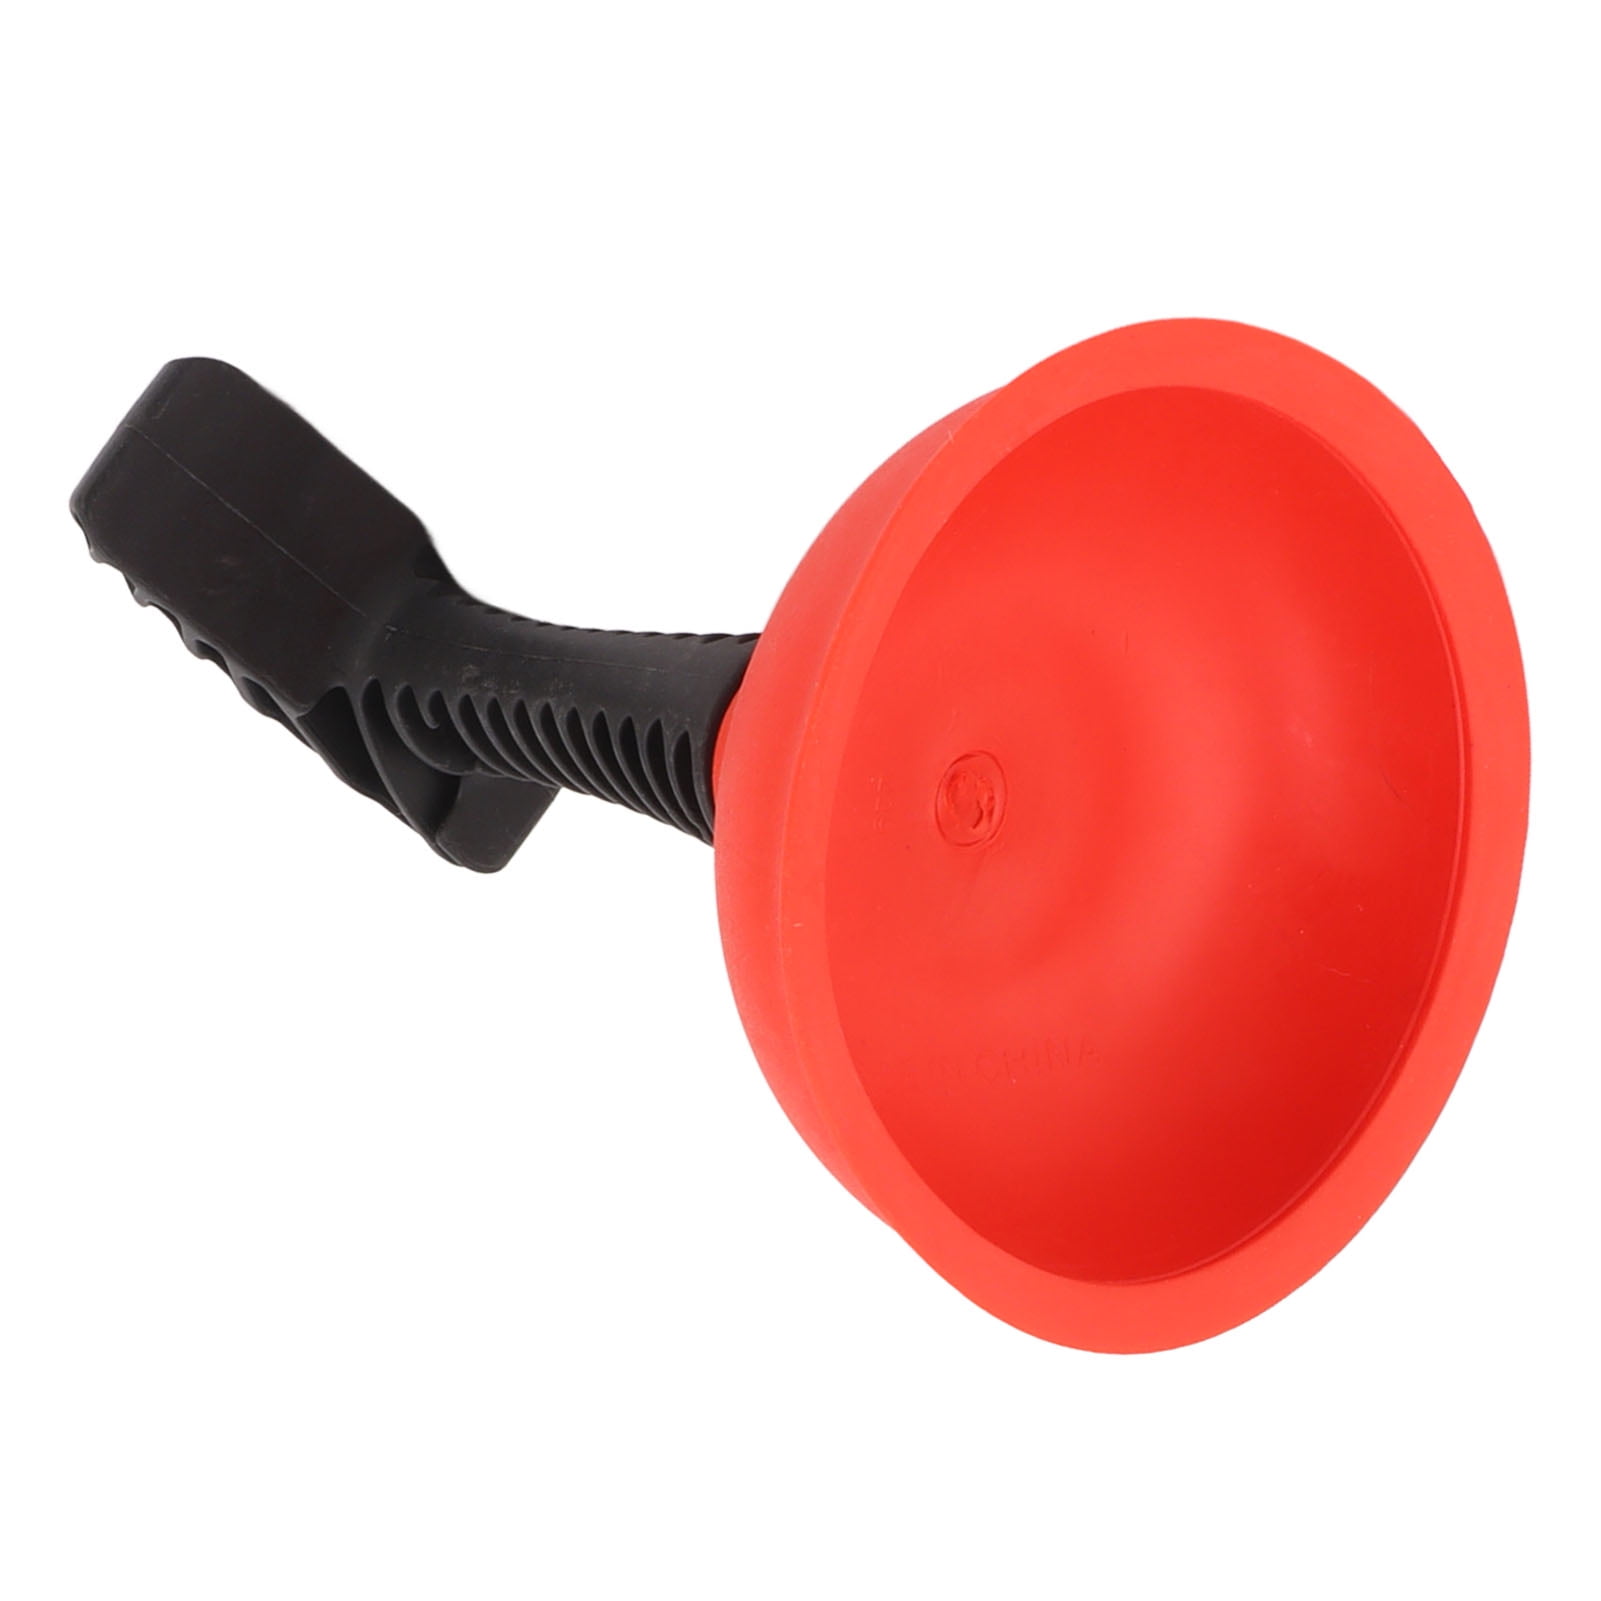 How to unclog your sink & tub  Plungeroo mini sink plunger review